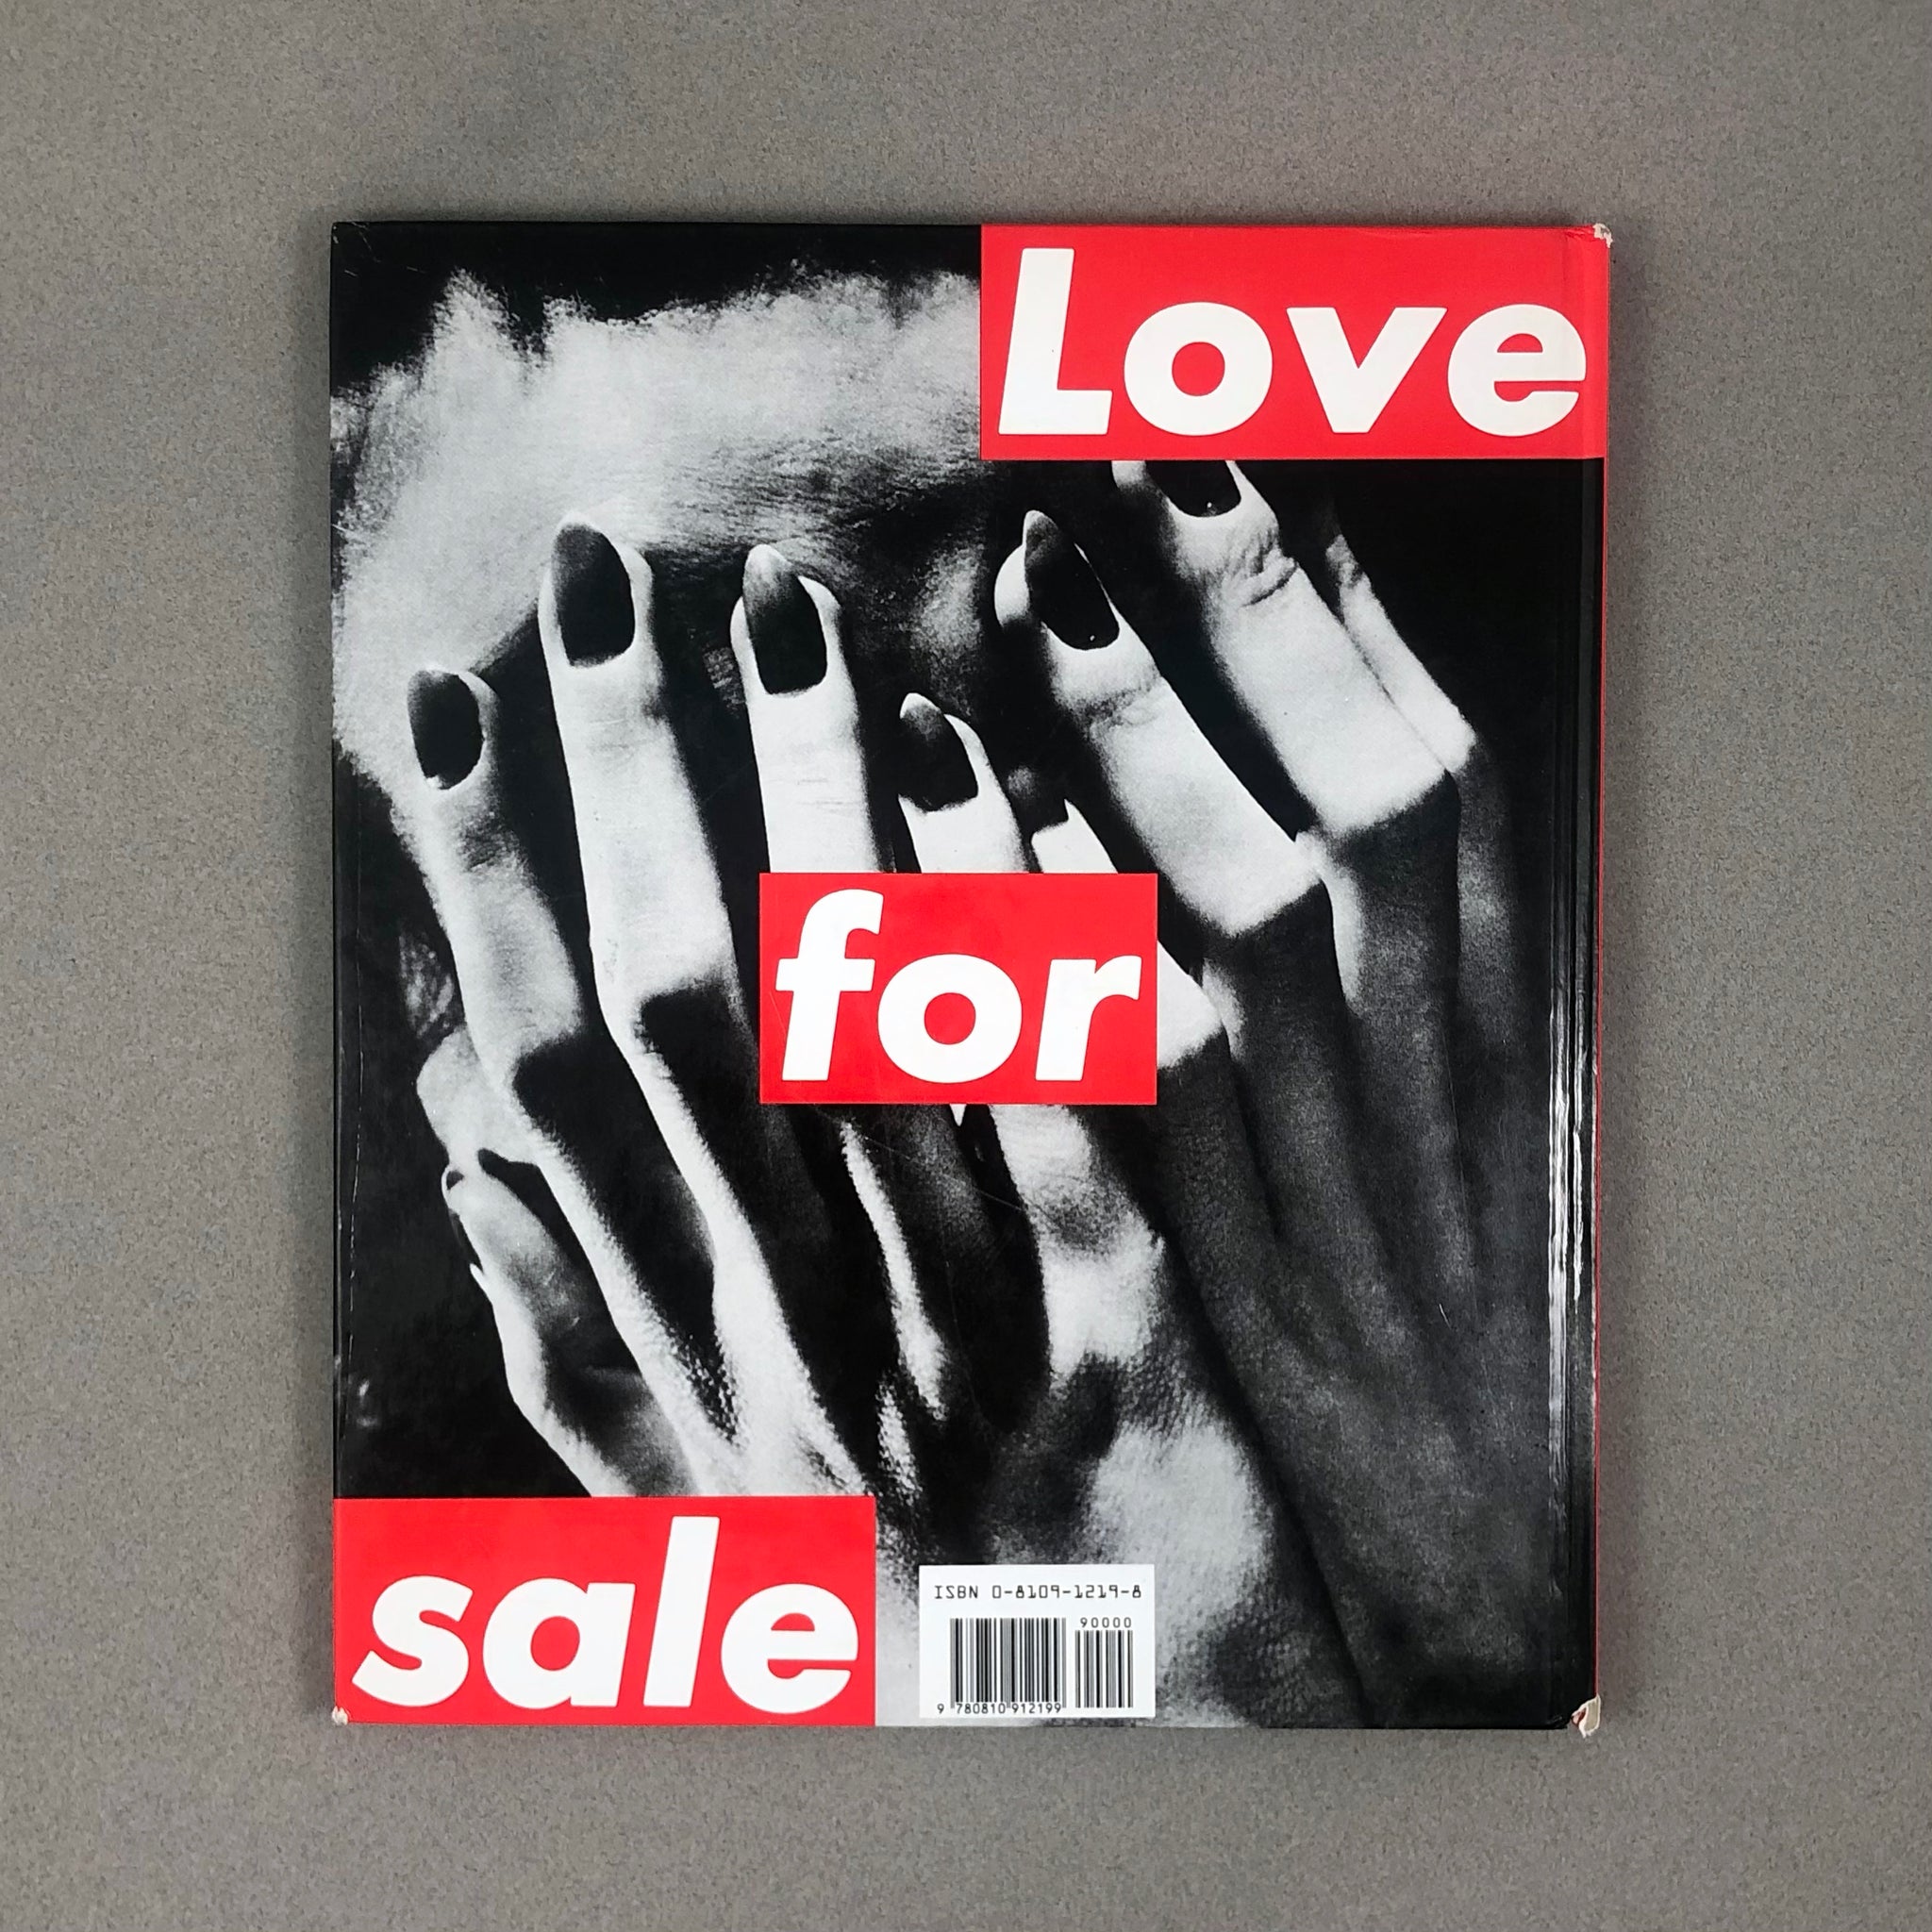 LOVE FOR SALE: THE WORDS AND PICTURES OF BARBARA KRUGER